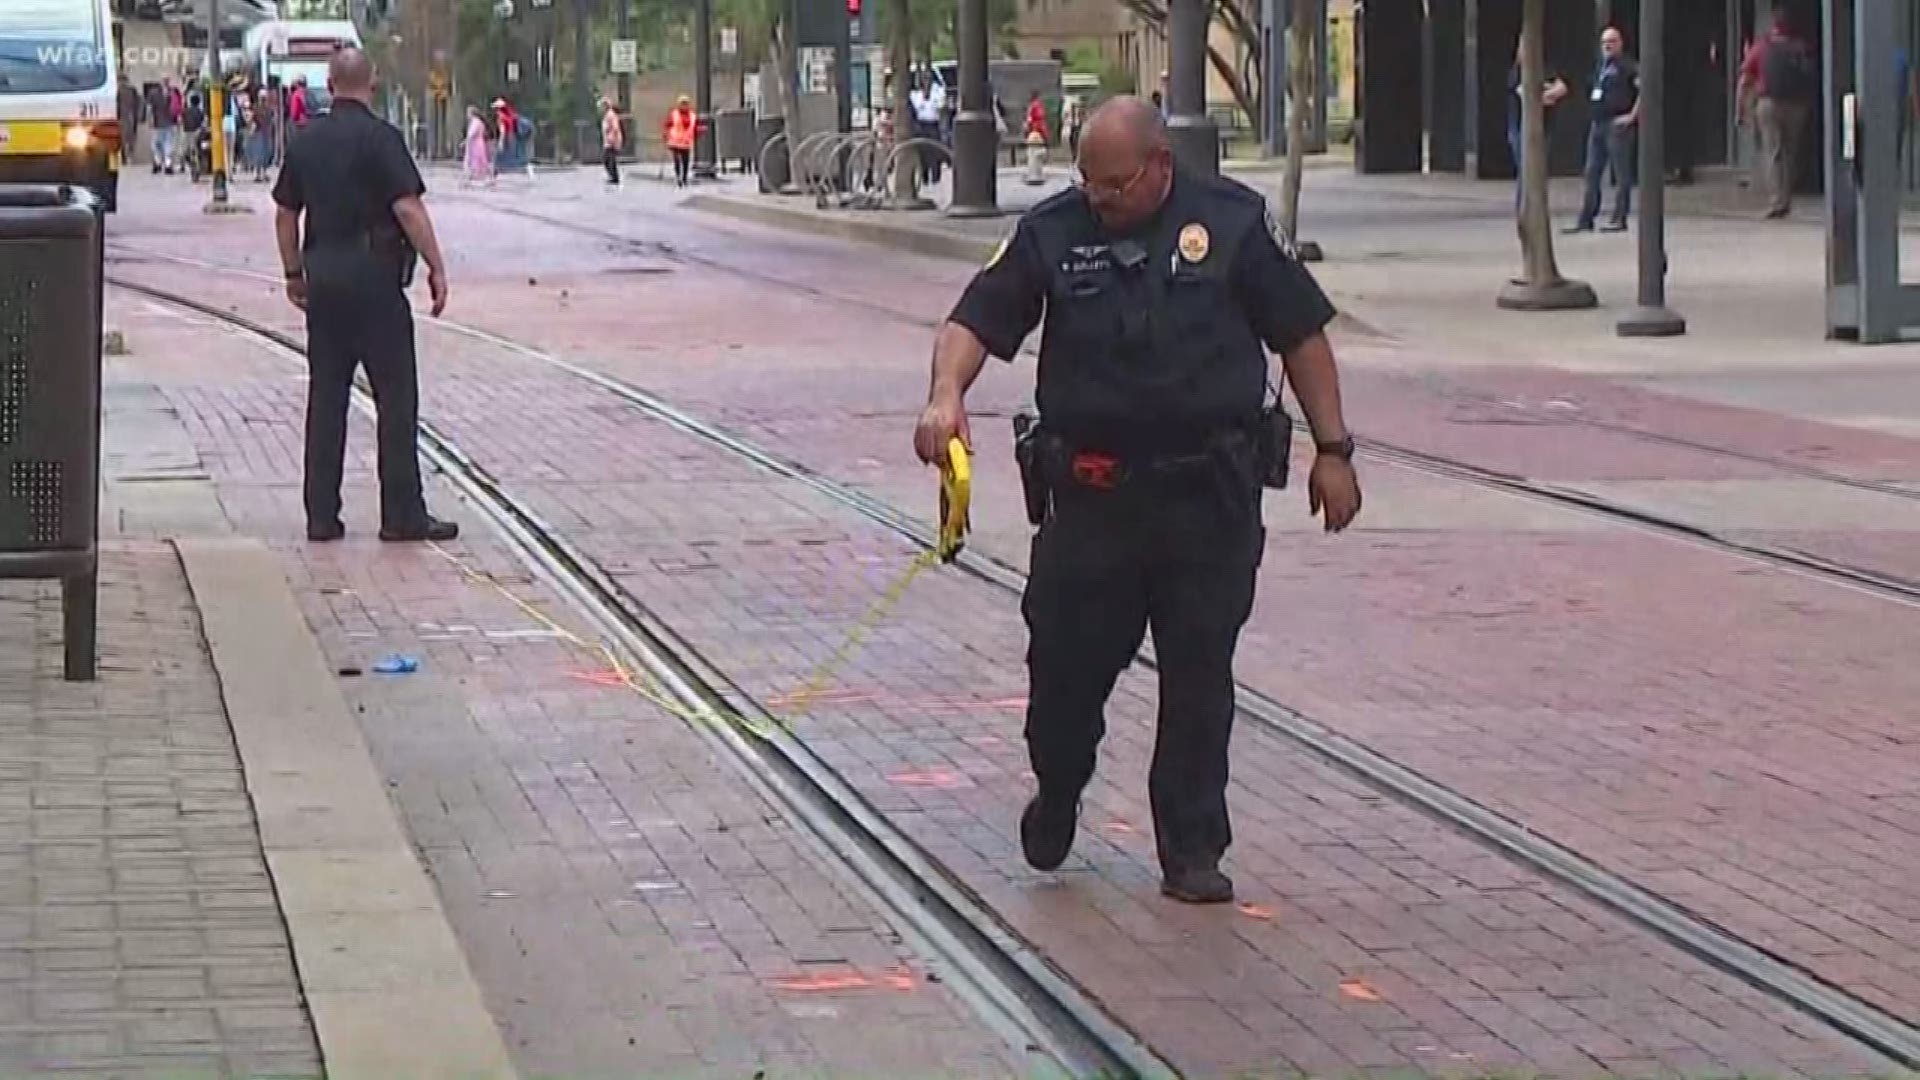 The officer was wearing headphones when he was hit by the train while walking along Olive Street at Bryan Street, Dallas police sources say.